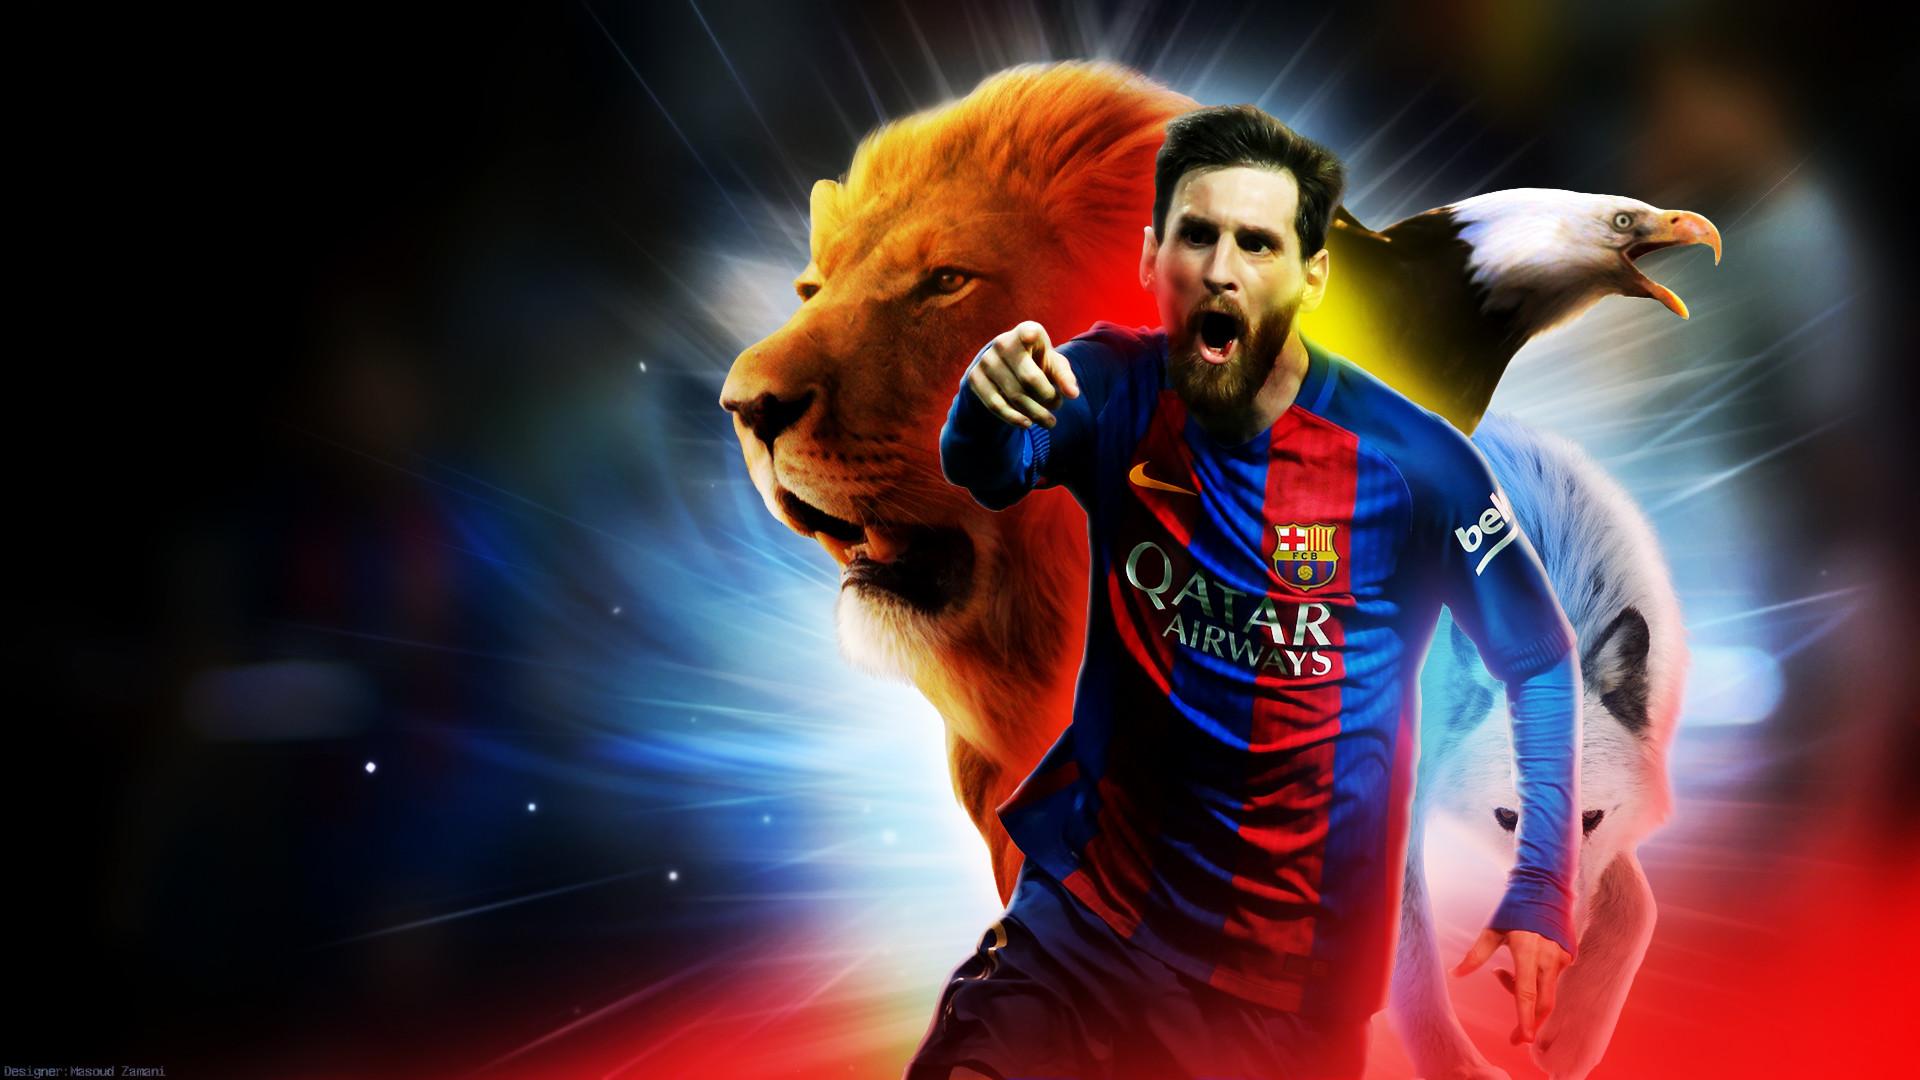 Messi Wallpaper Lionel Messi Backgrounds Pictures Images Here You - Riset